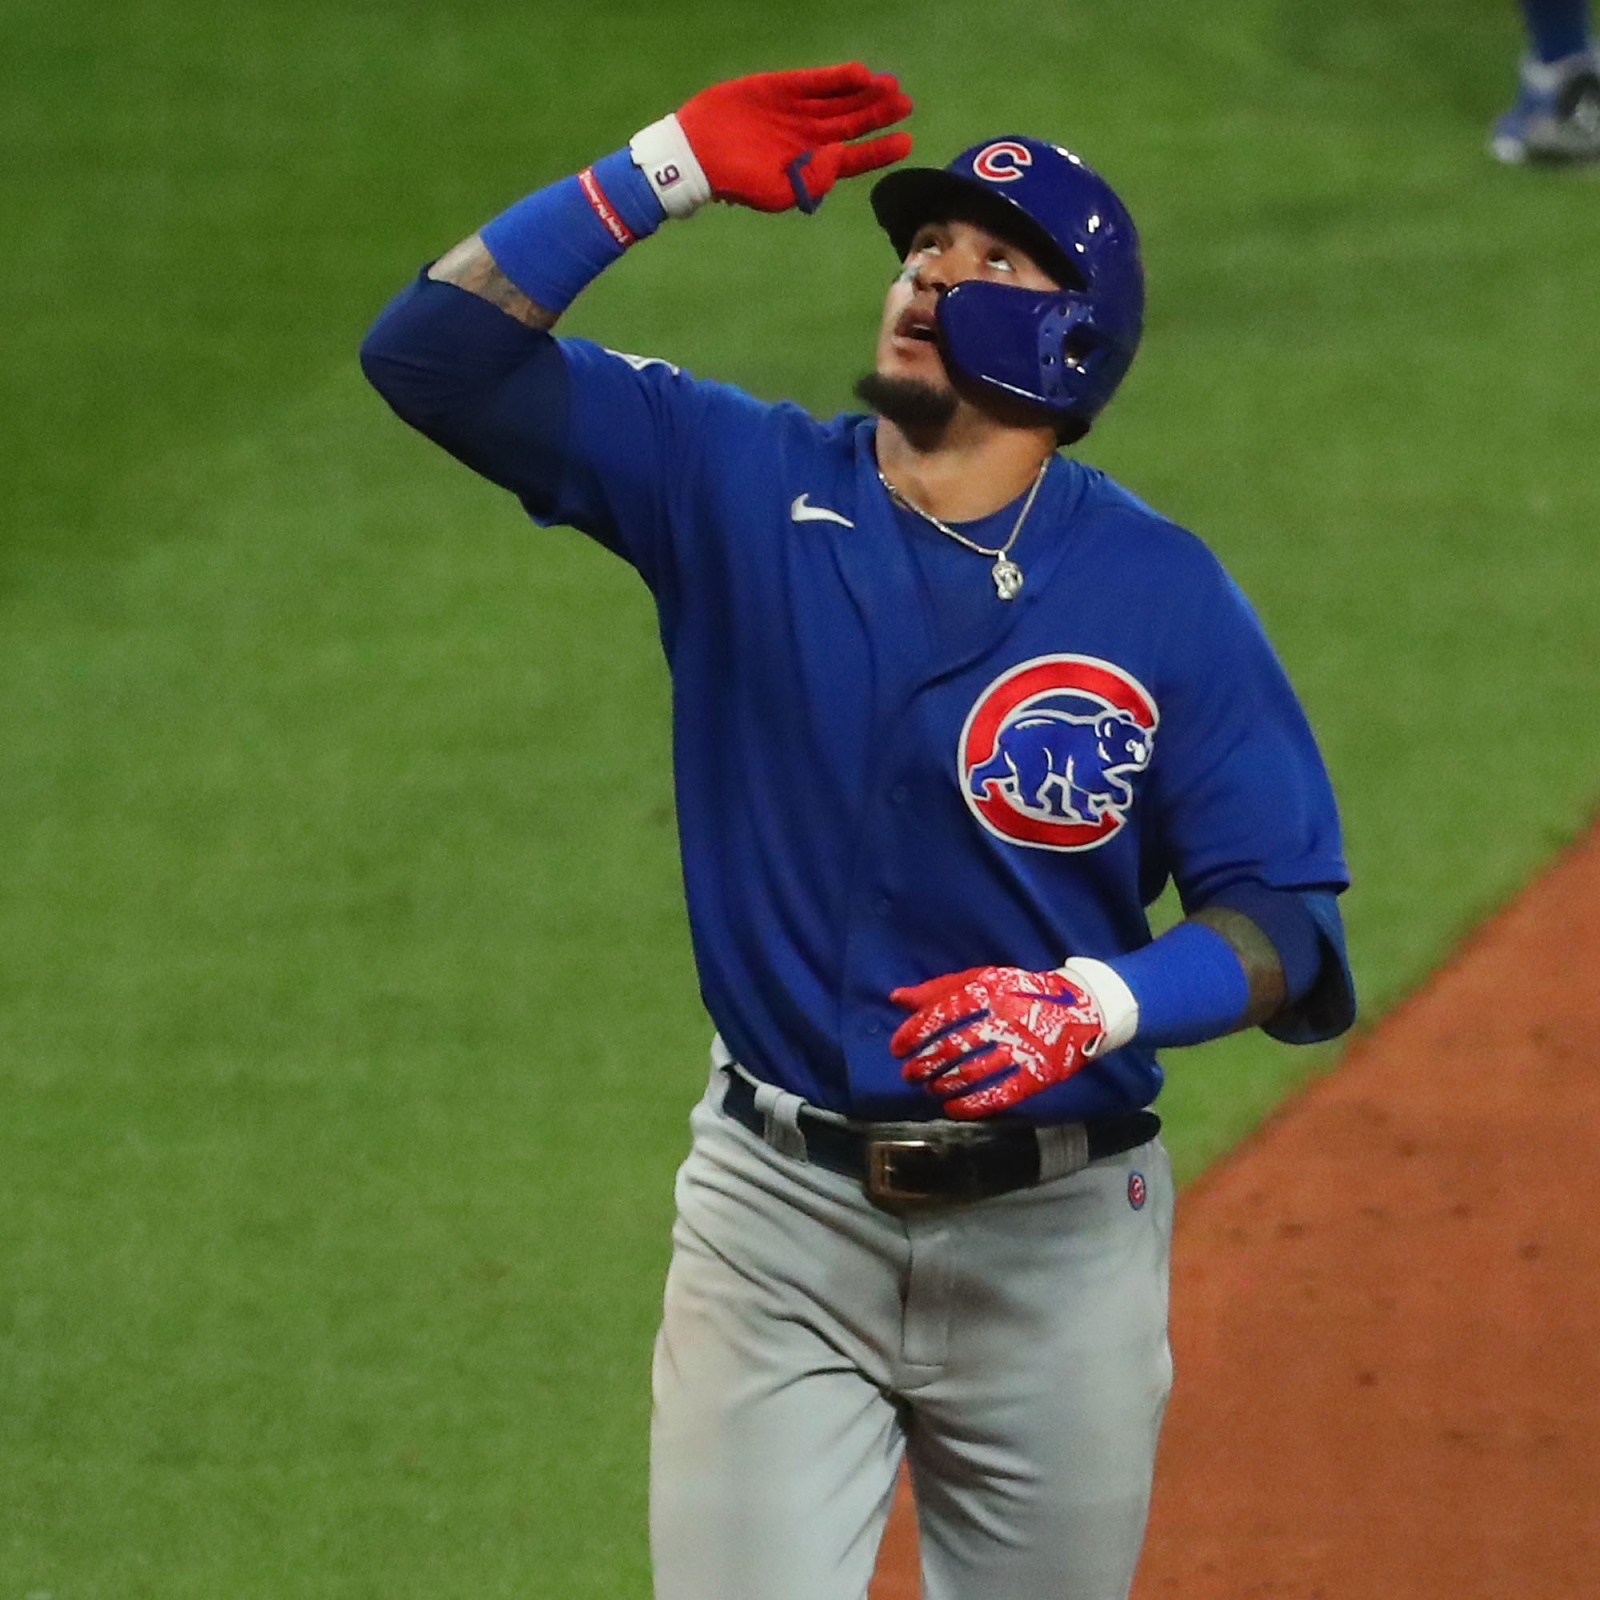 Baez, Contreras owe all-star success to Hendry and other Cubs staffers